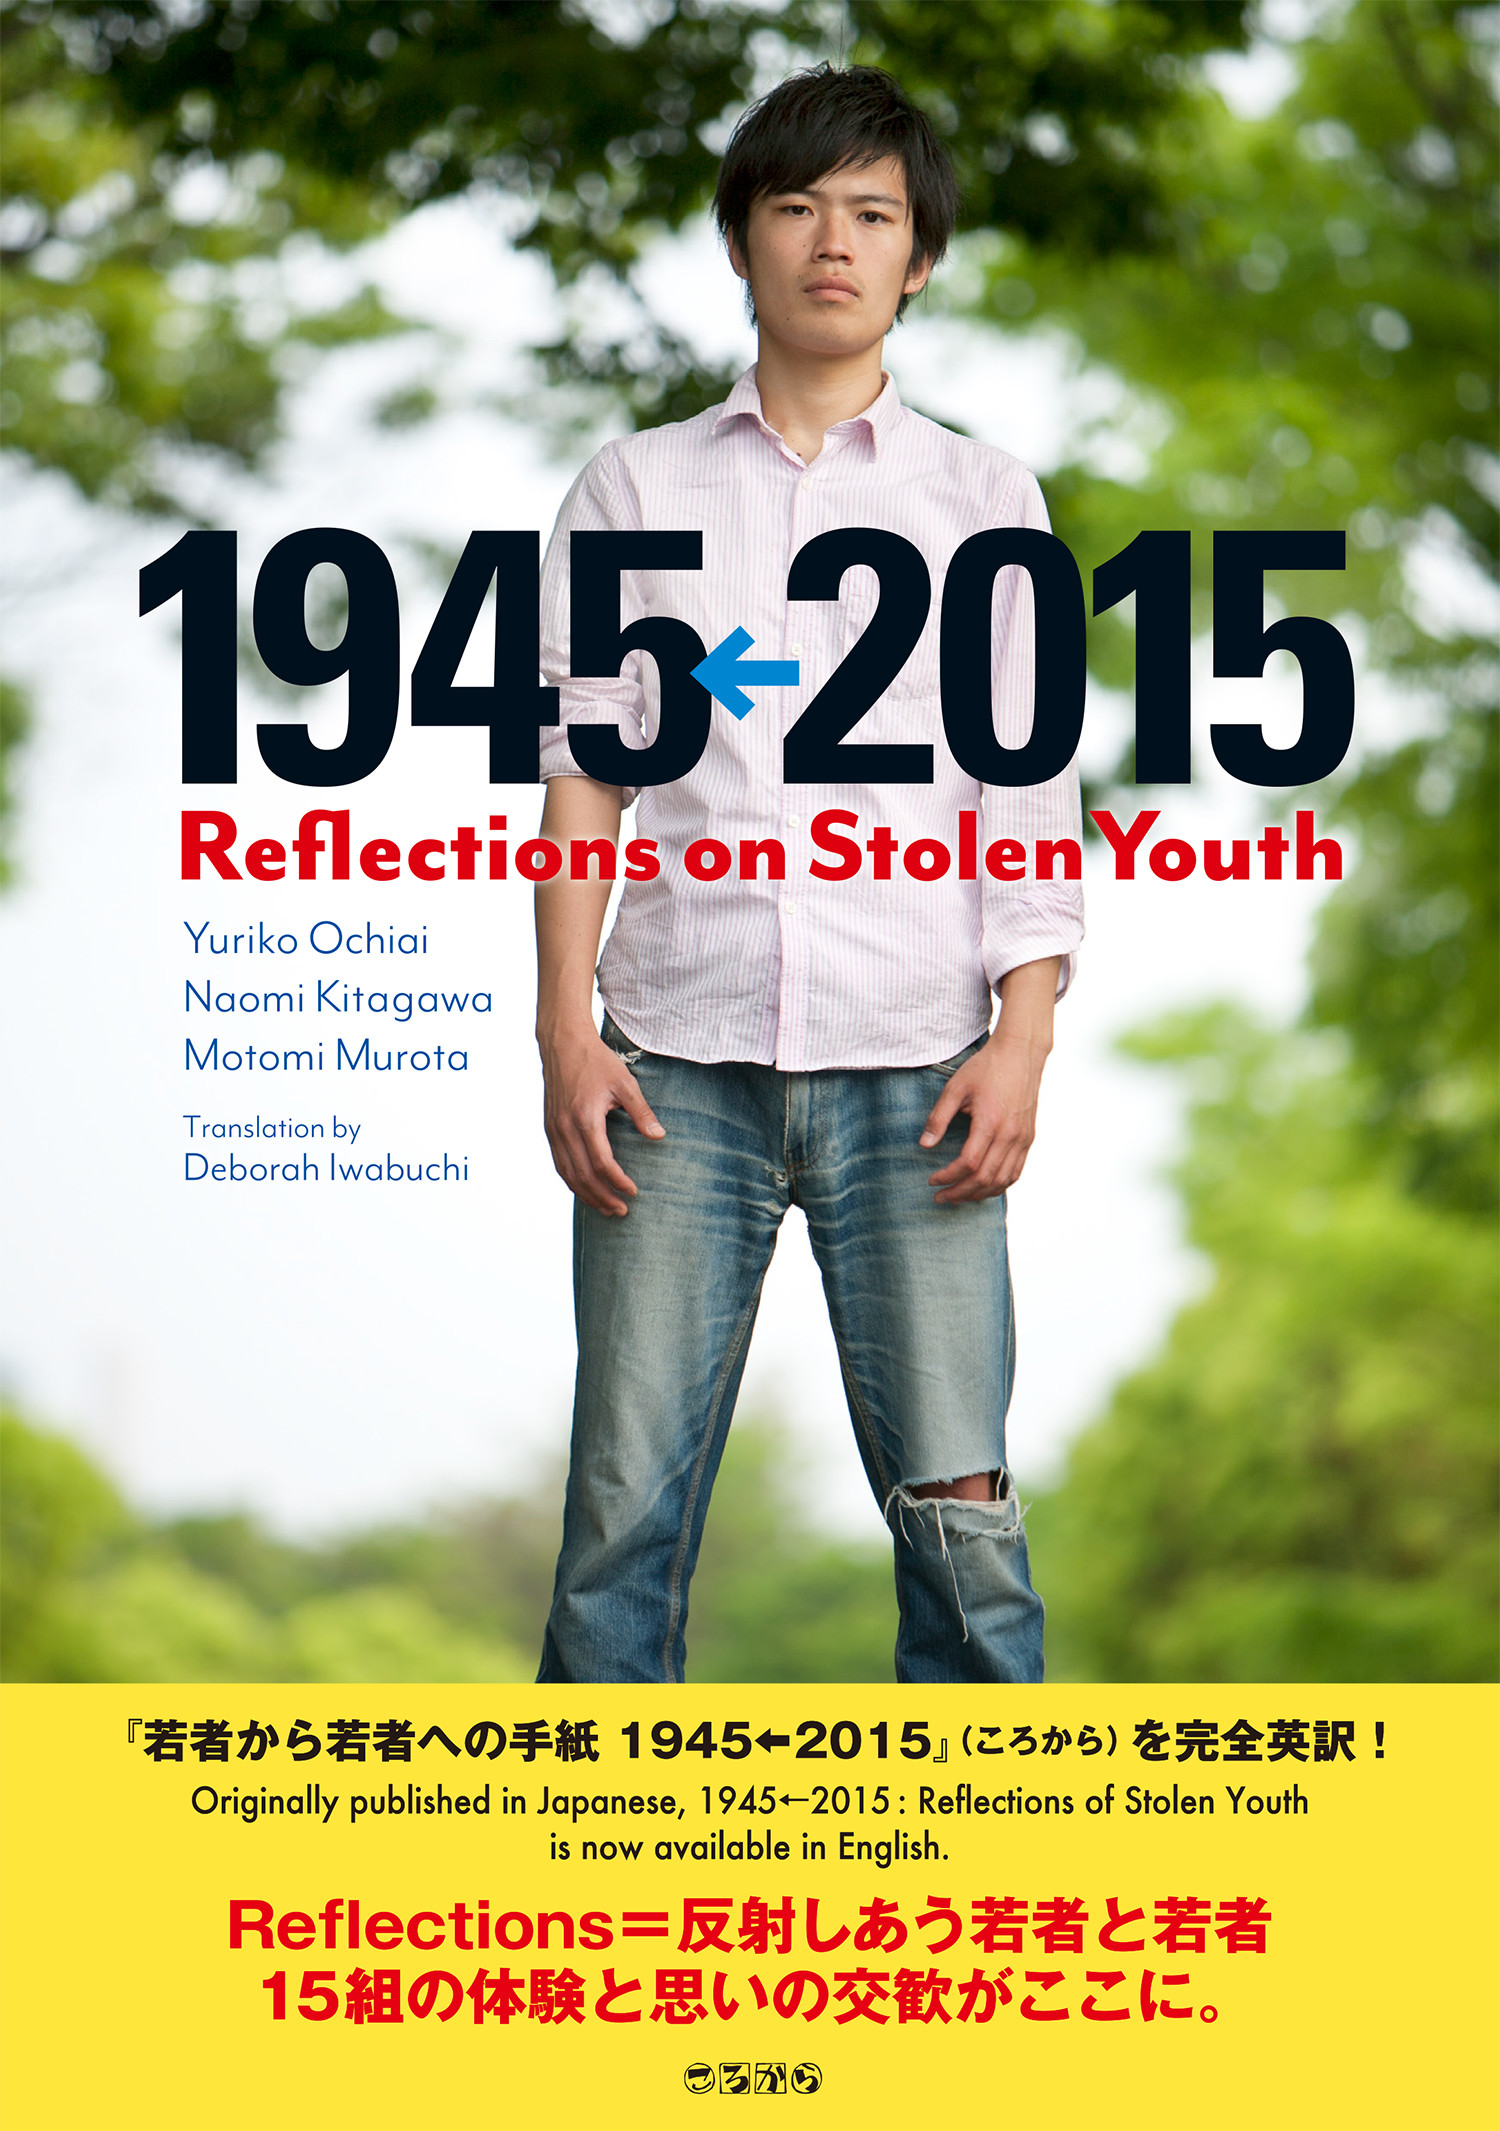 1945←2015 : Reflections on Stolen Youthの商品画像